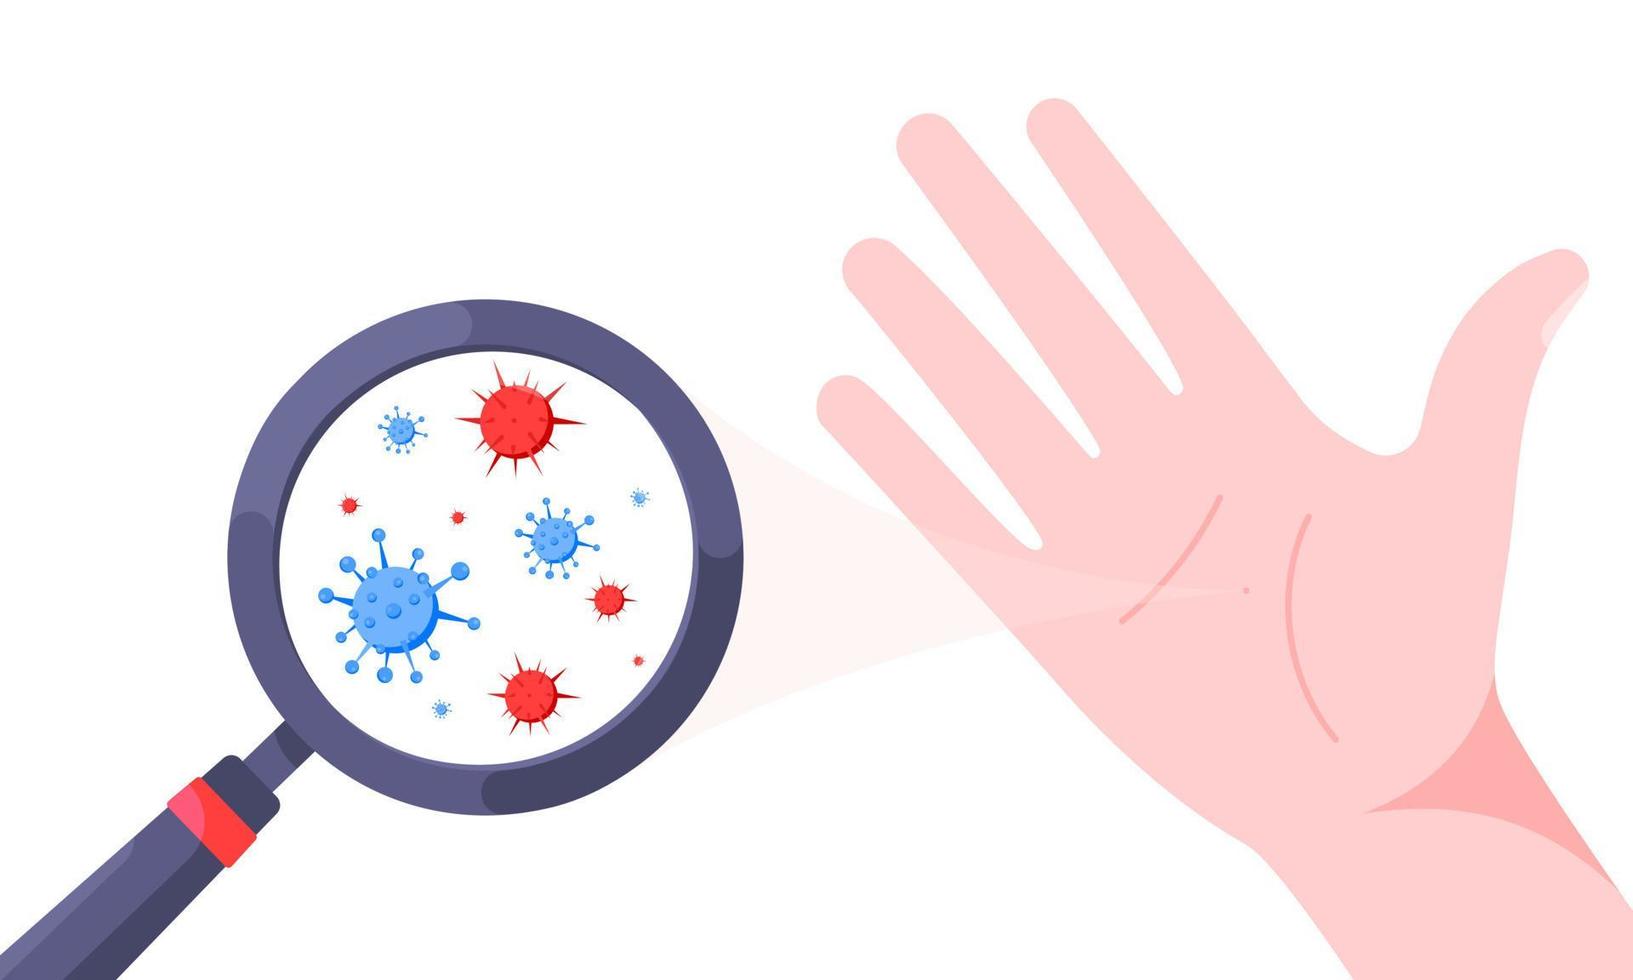 Germs, bacterias and viruses on dirty hand palm vector illustration isolated on white background.